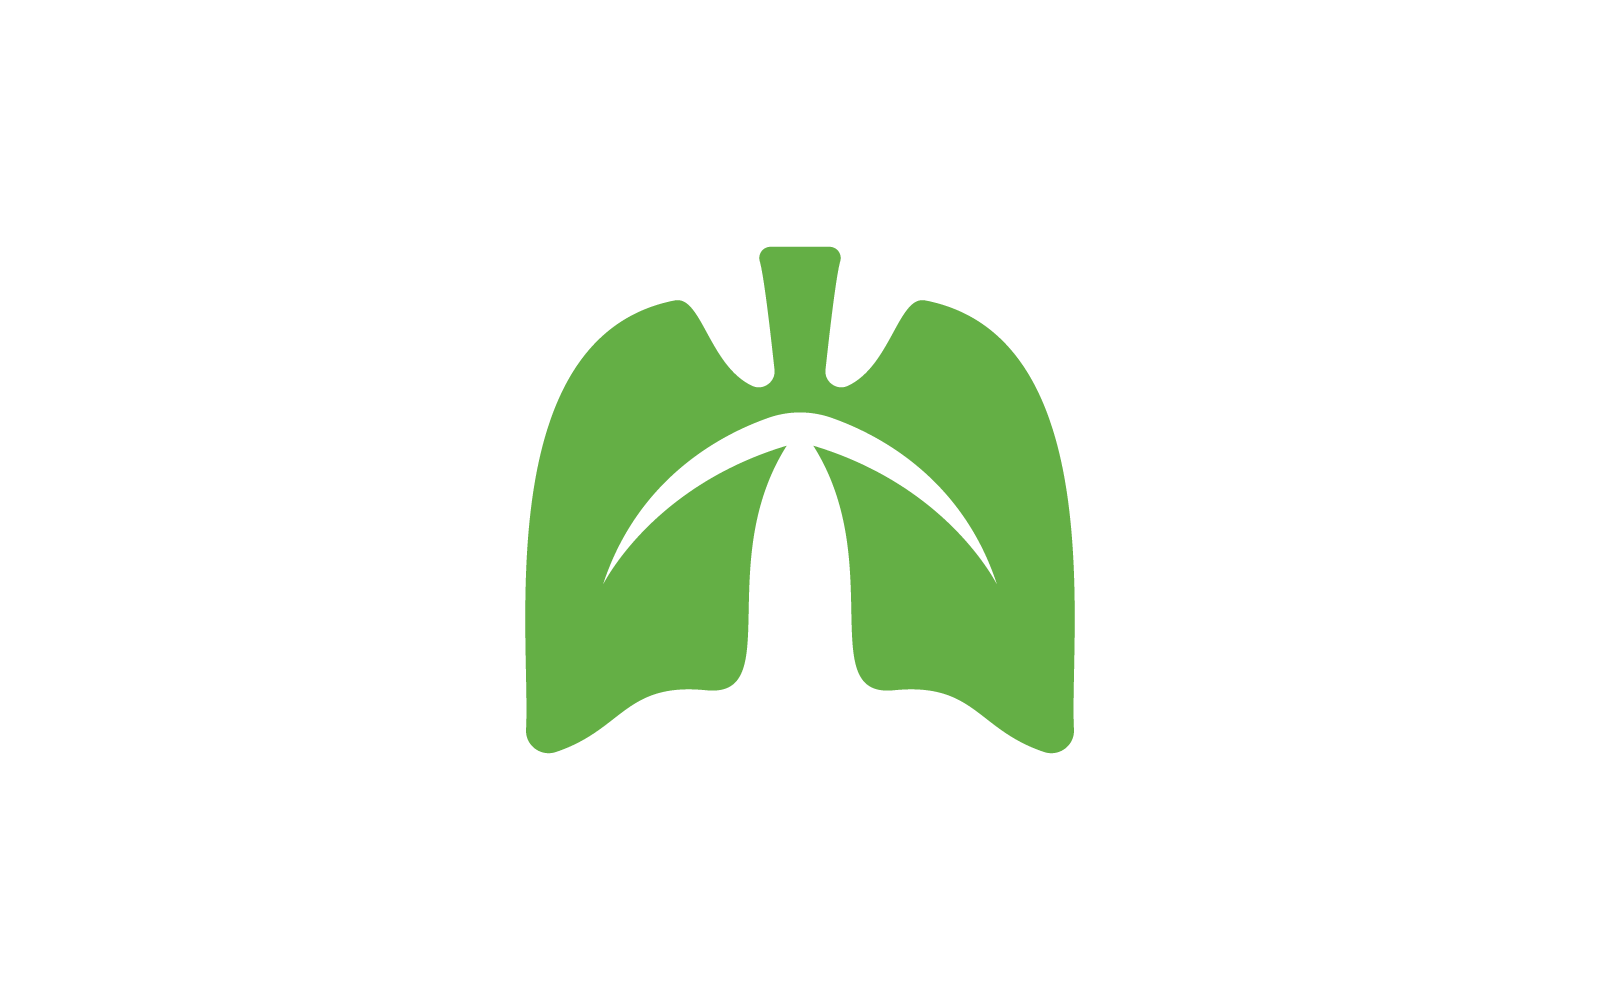 Lungs illustration vector template design